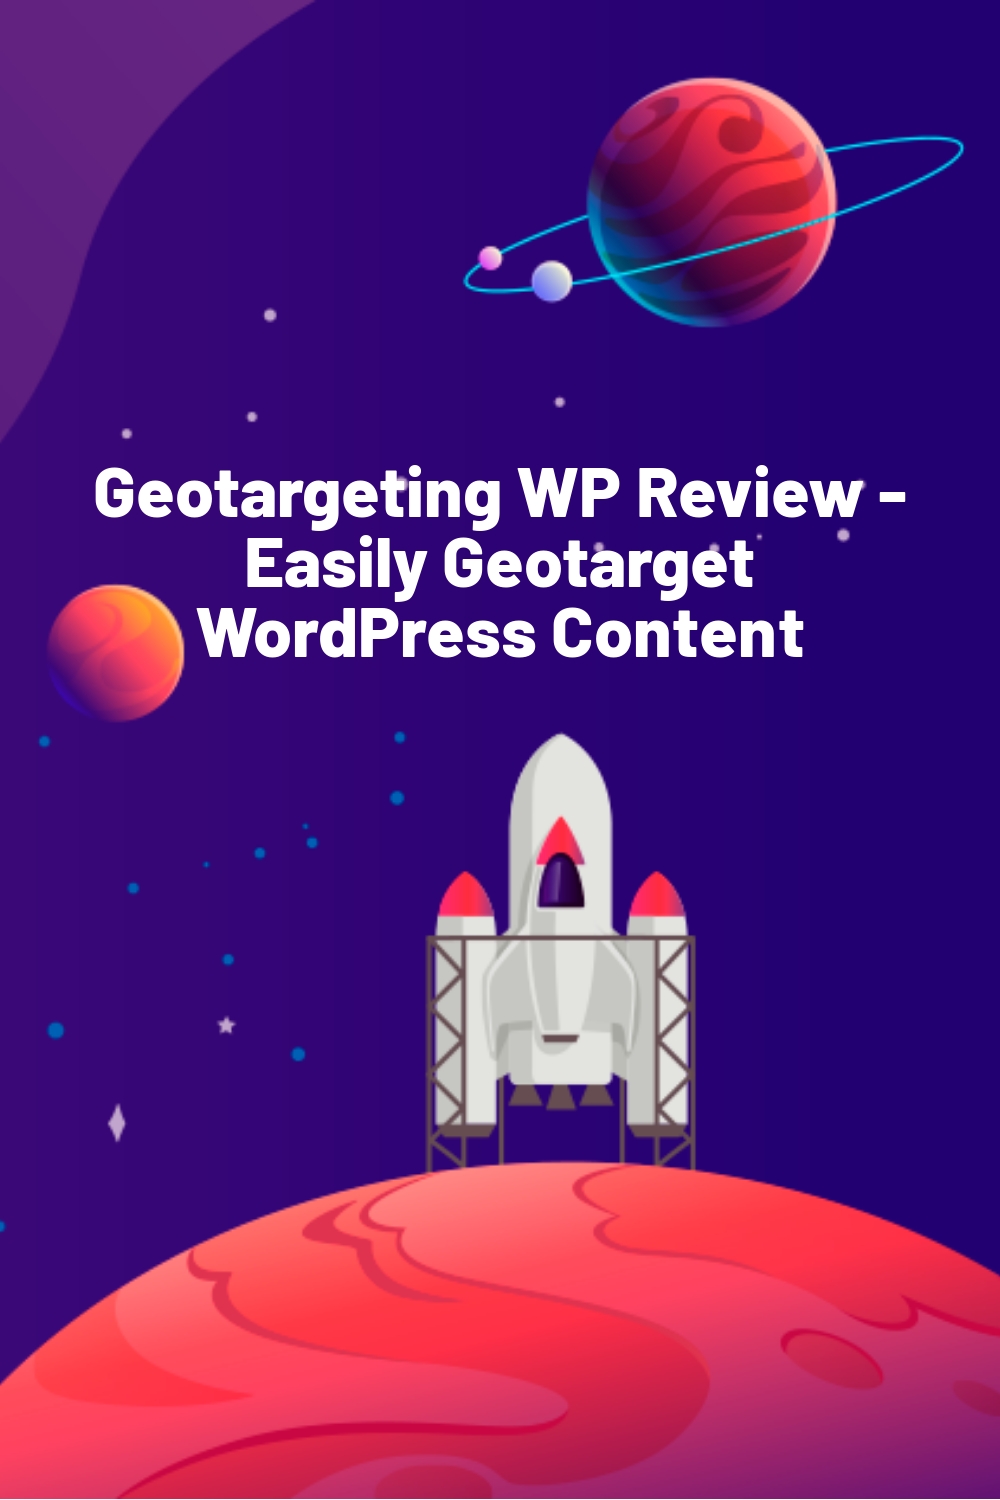 Geotargeting WP Review – Easily Geotarget WordPress Content